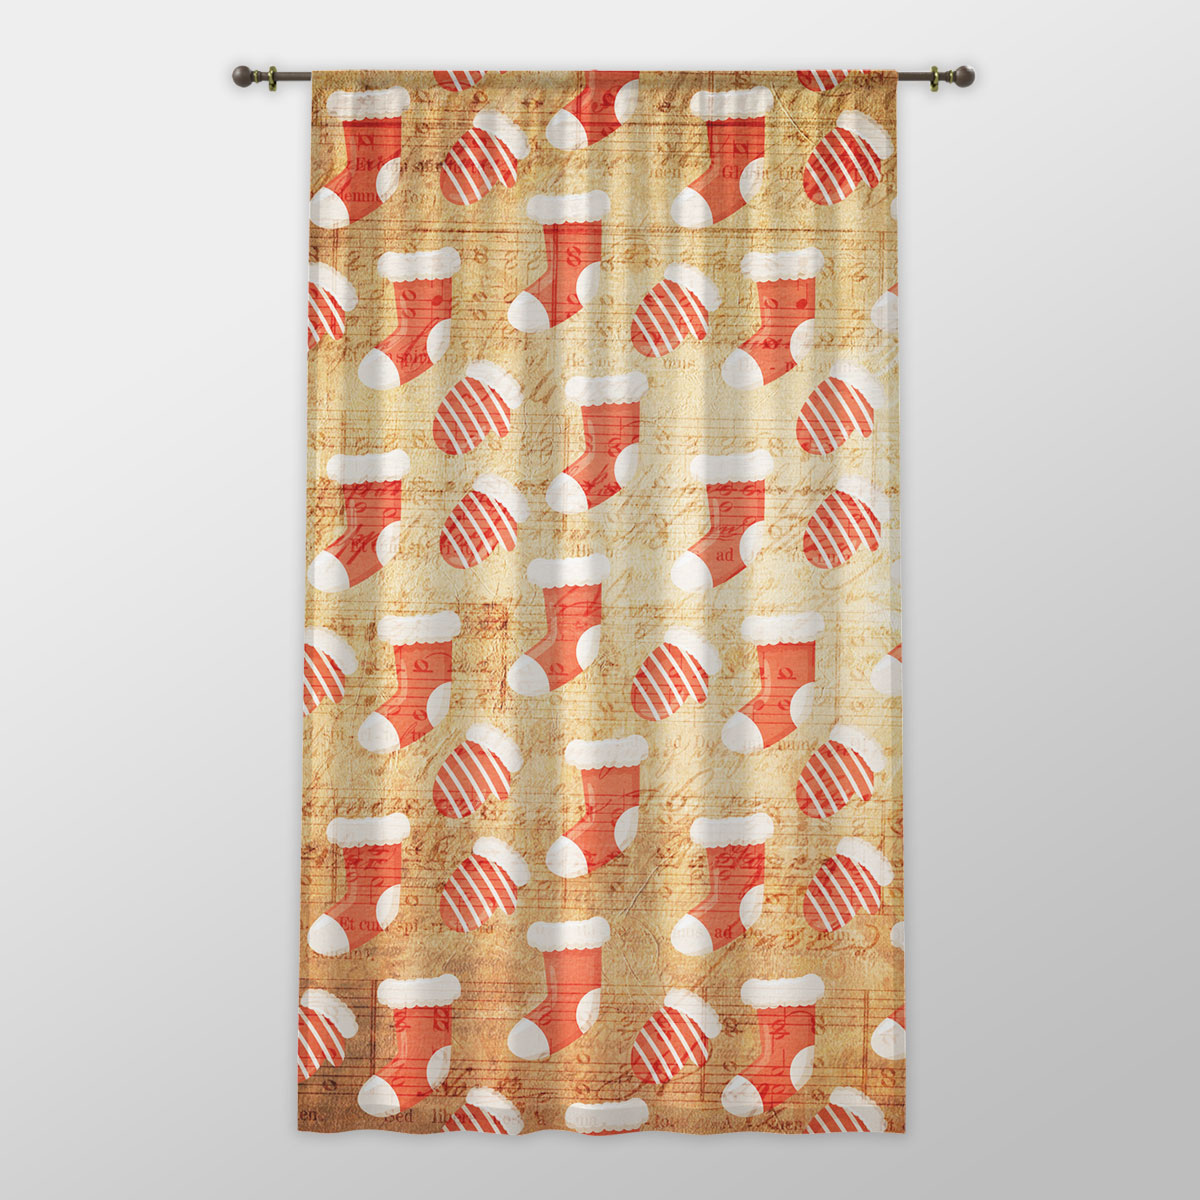 Red Socks And Christmas Oven Mitts One-side Printed Window Curtain